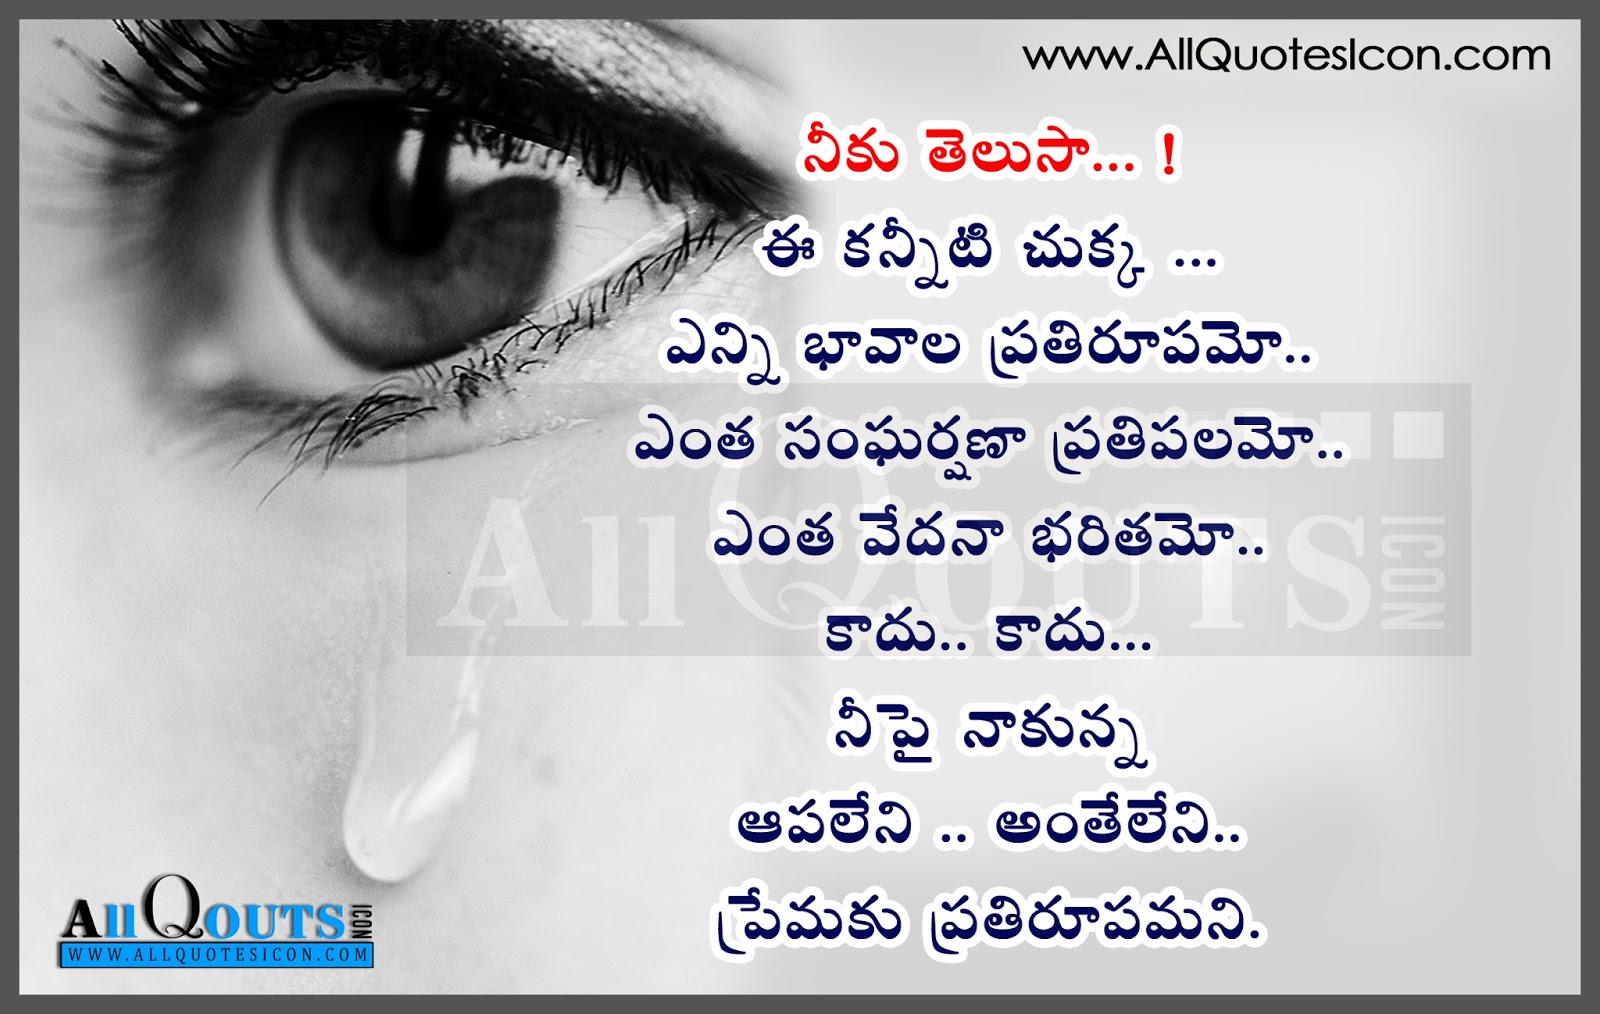 Love Quotes and Thoughts in Telugu Telugu